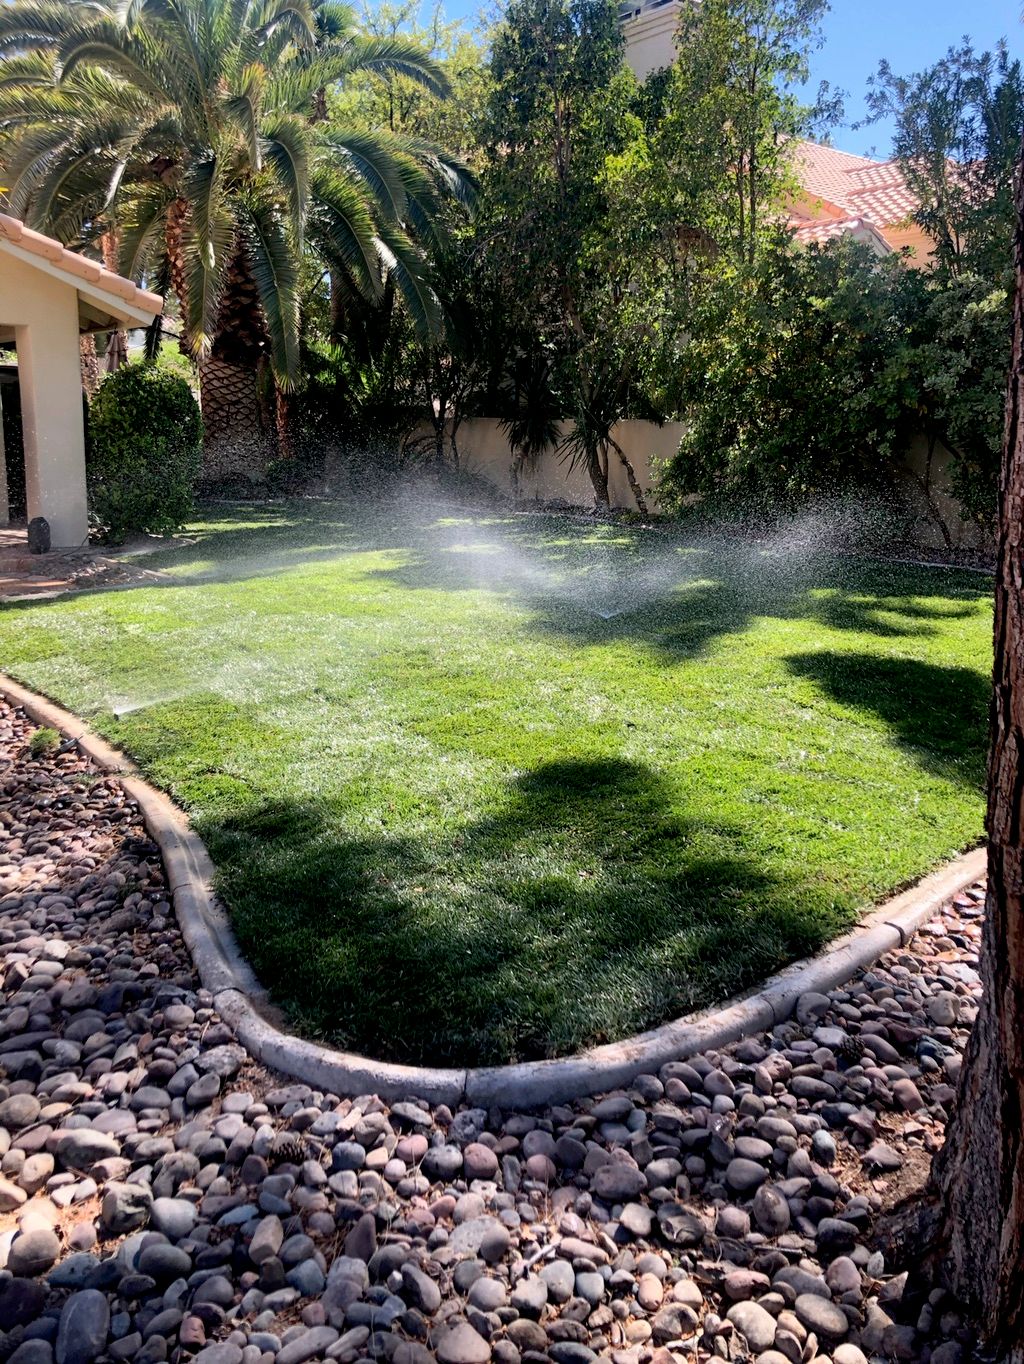 The 10 Best Landscaping Companies In, Landscaping Jobs Las Vegas Nv